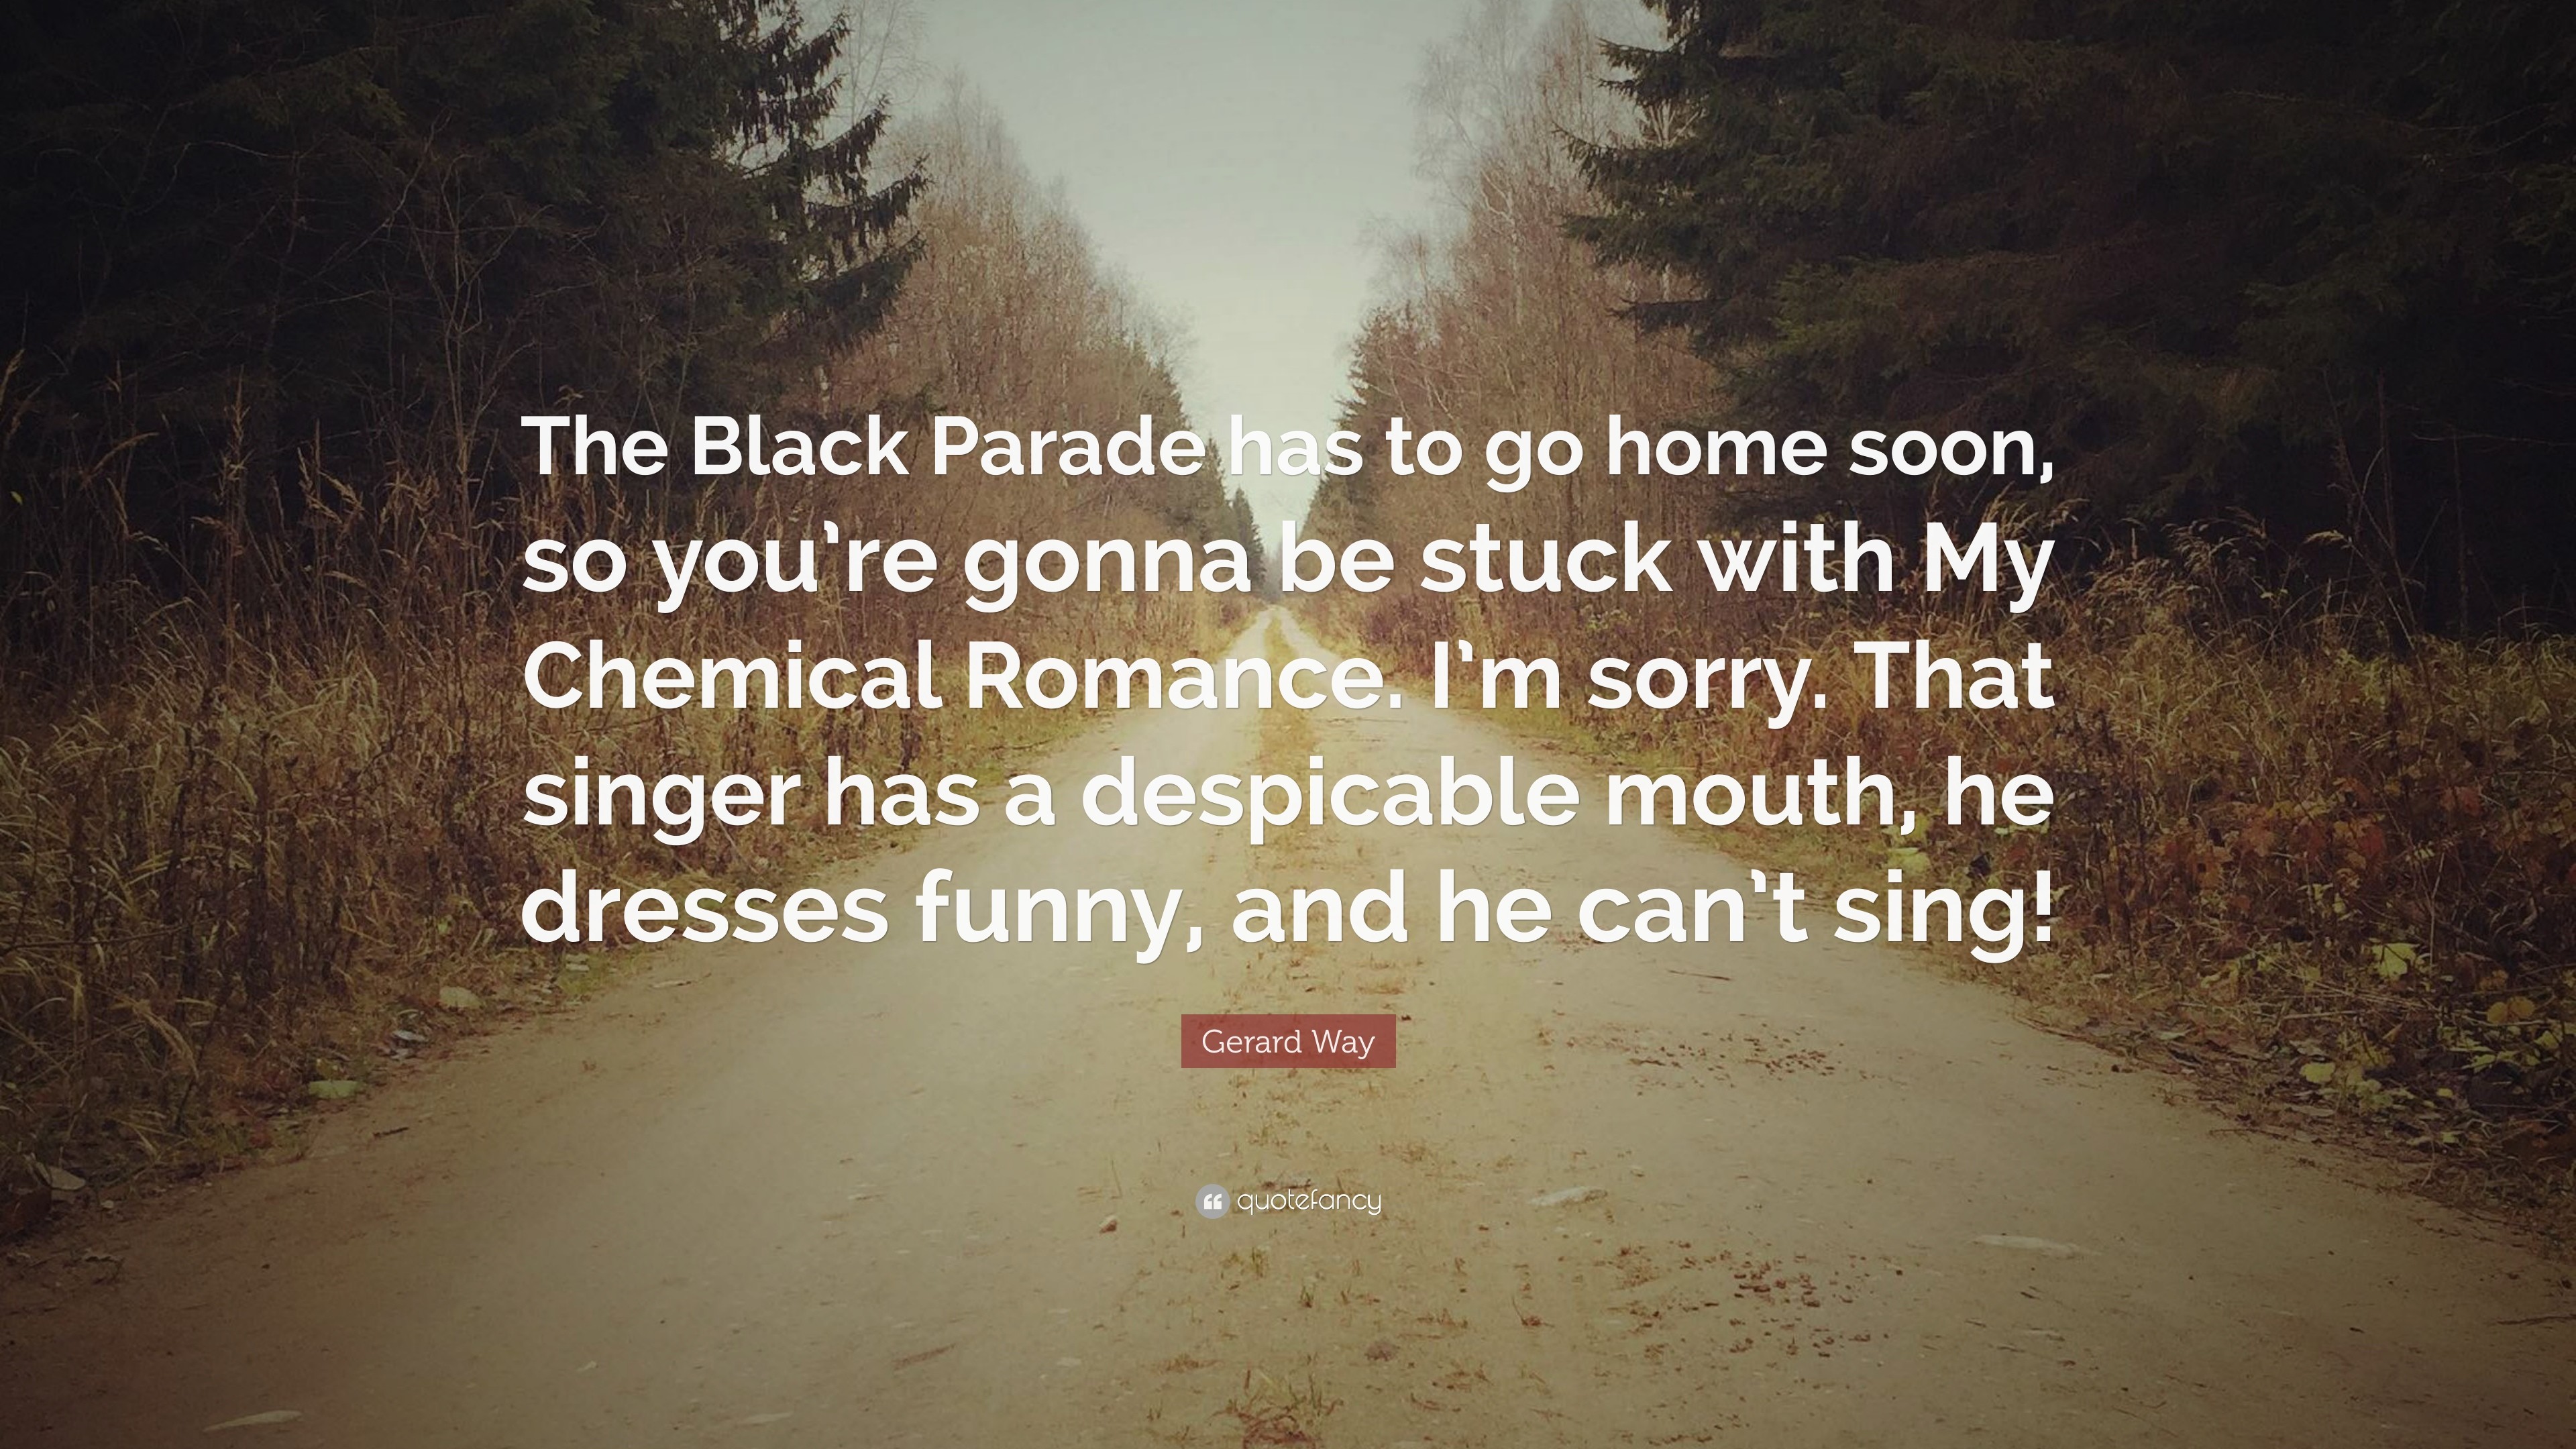 3840x2160 Gerard Way Quote: “The Black Parade has to go home soon, so you